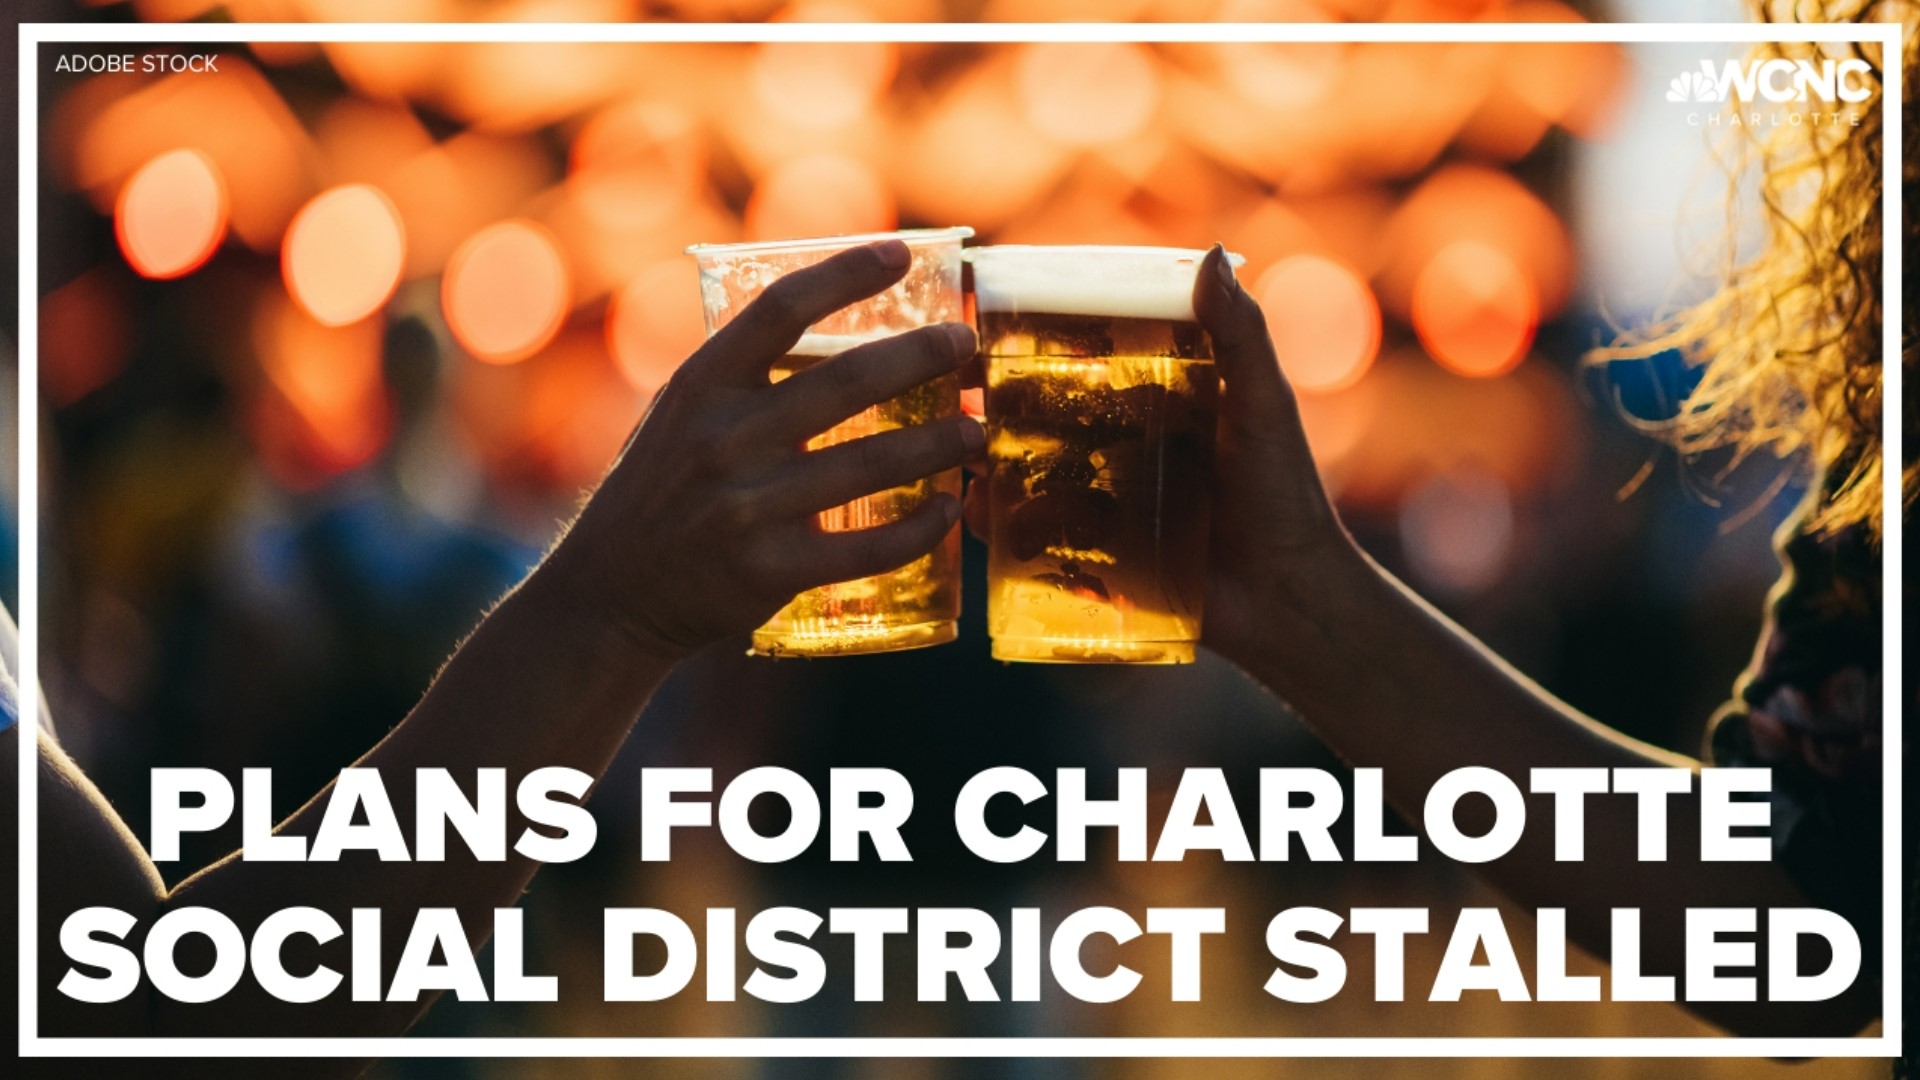 Social districts are popping up across our region, but Charlotte won't see one just yet.